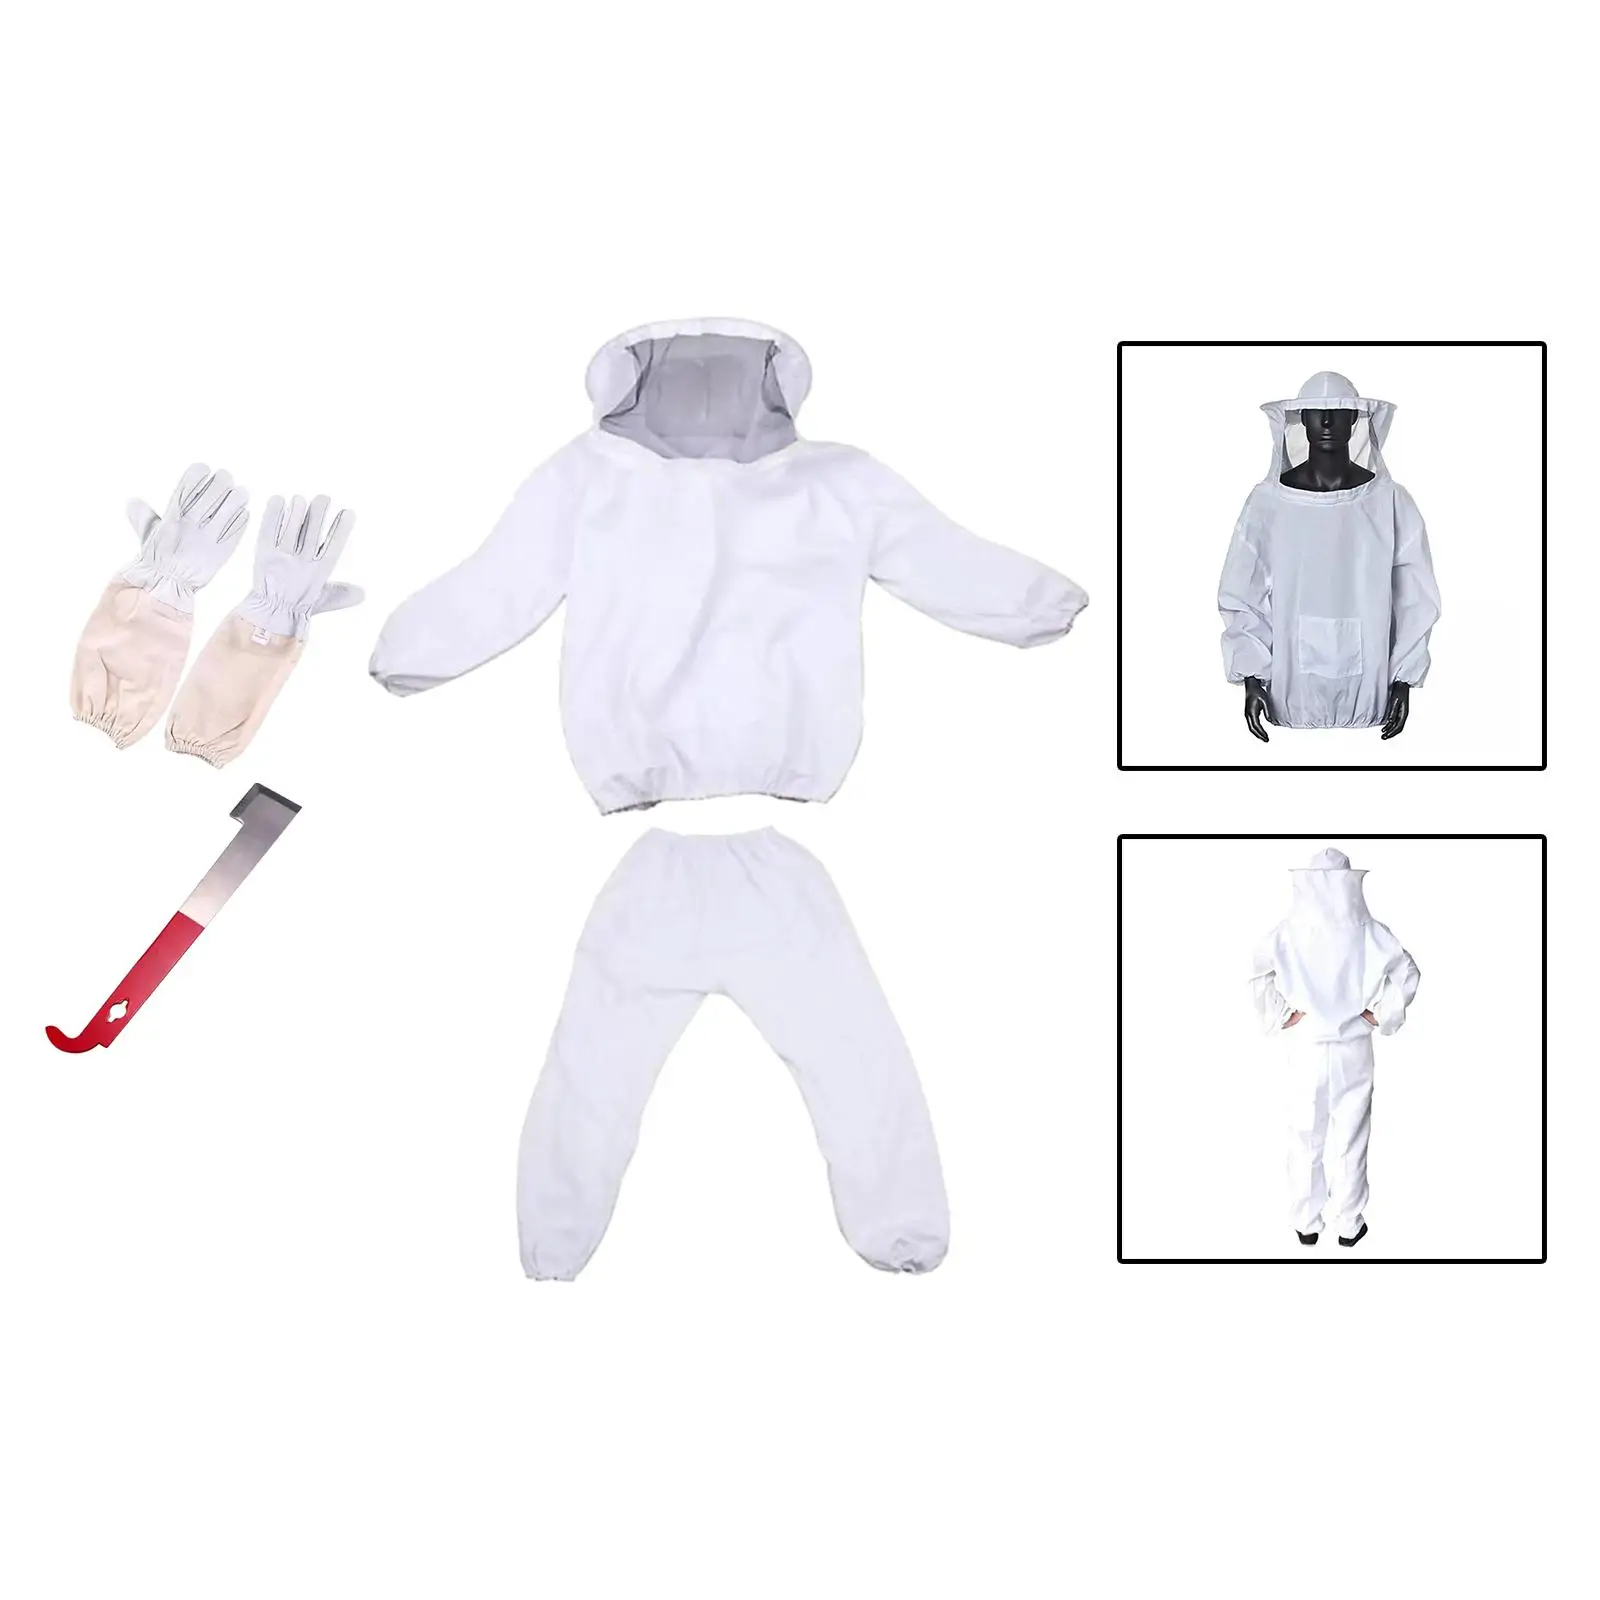 Complete Beekeeping Suit Cotton Protective Equipment Beekeeper Costume Bee Keepers Suit for Male and Female Beginner